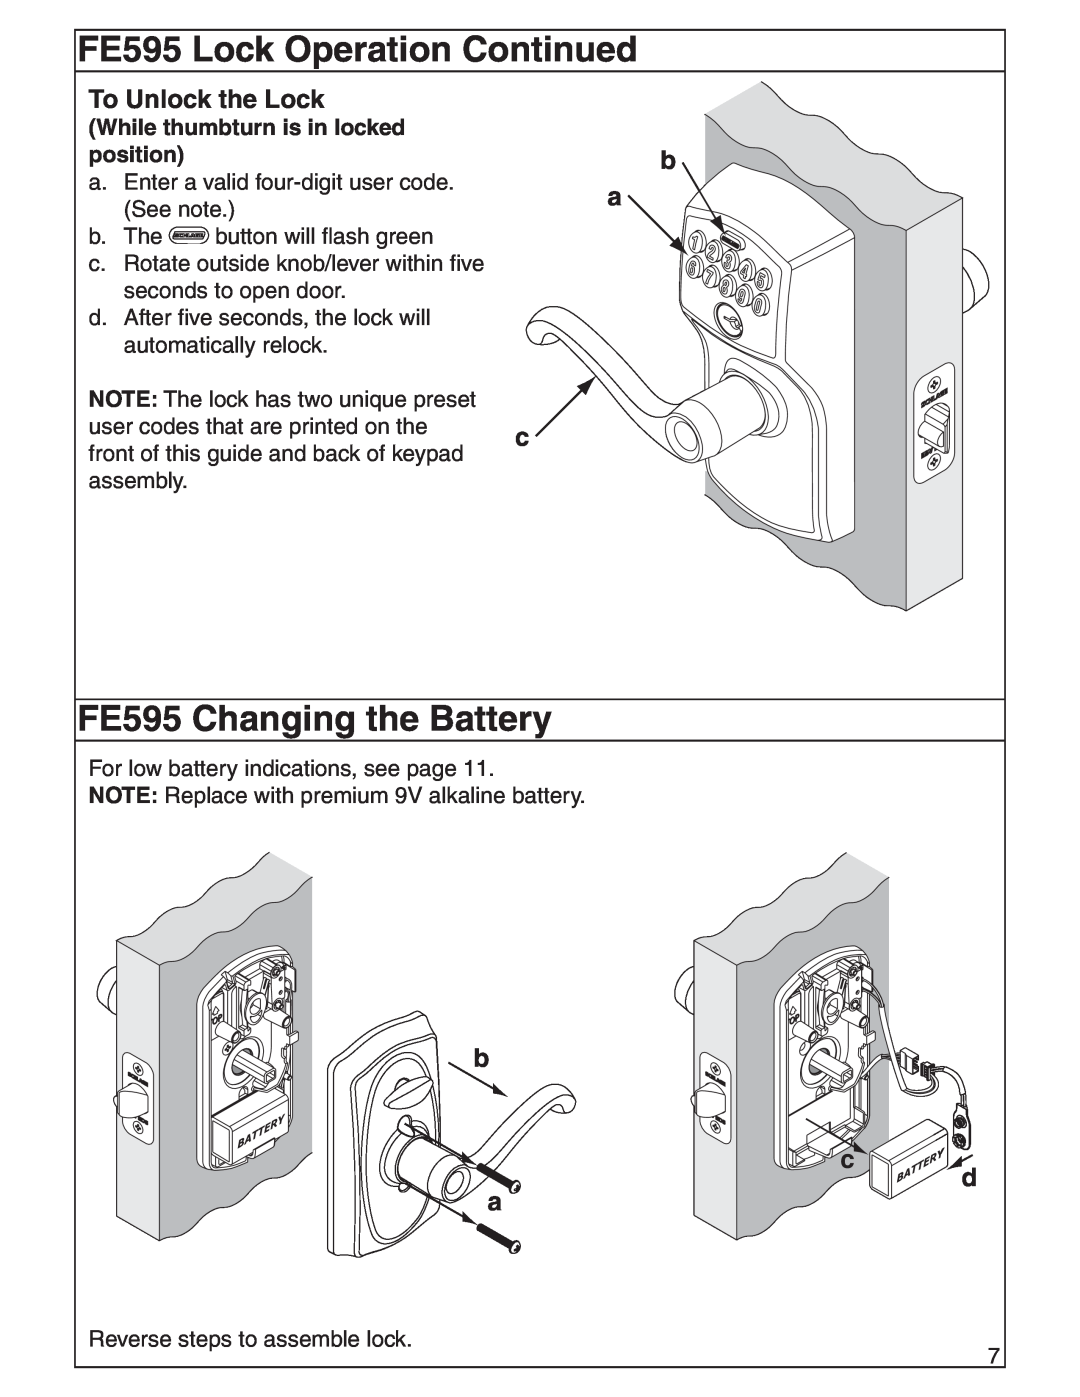 Schlage FE575 FE595 Lock Operation Continued, FE595 Changing the Battery, b c a, While thumbturn is in locked, position 